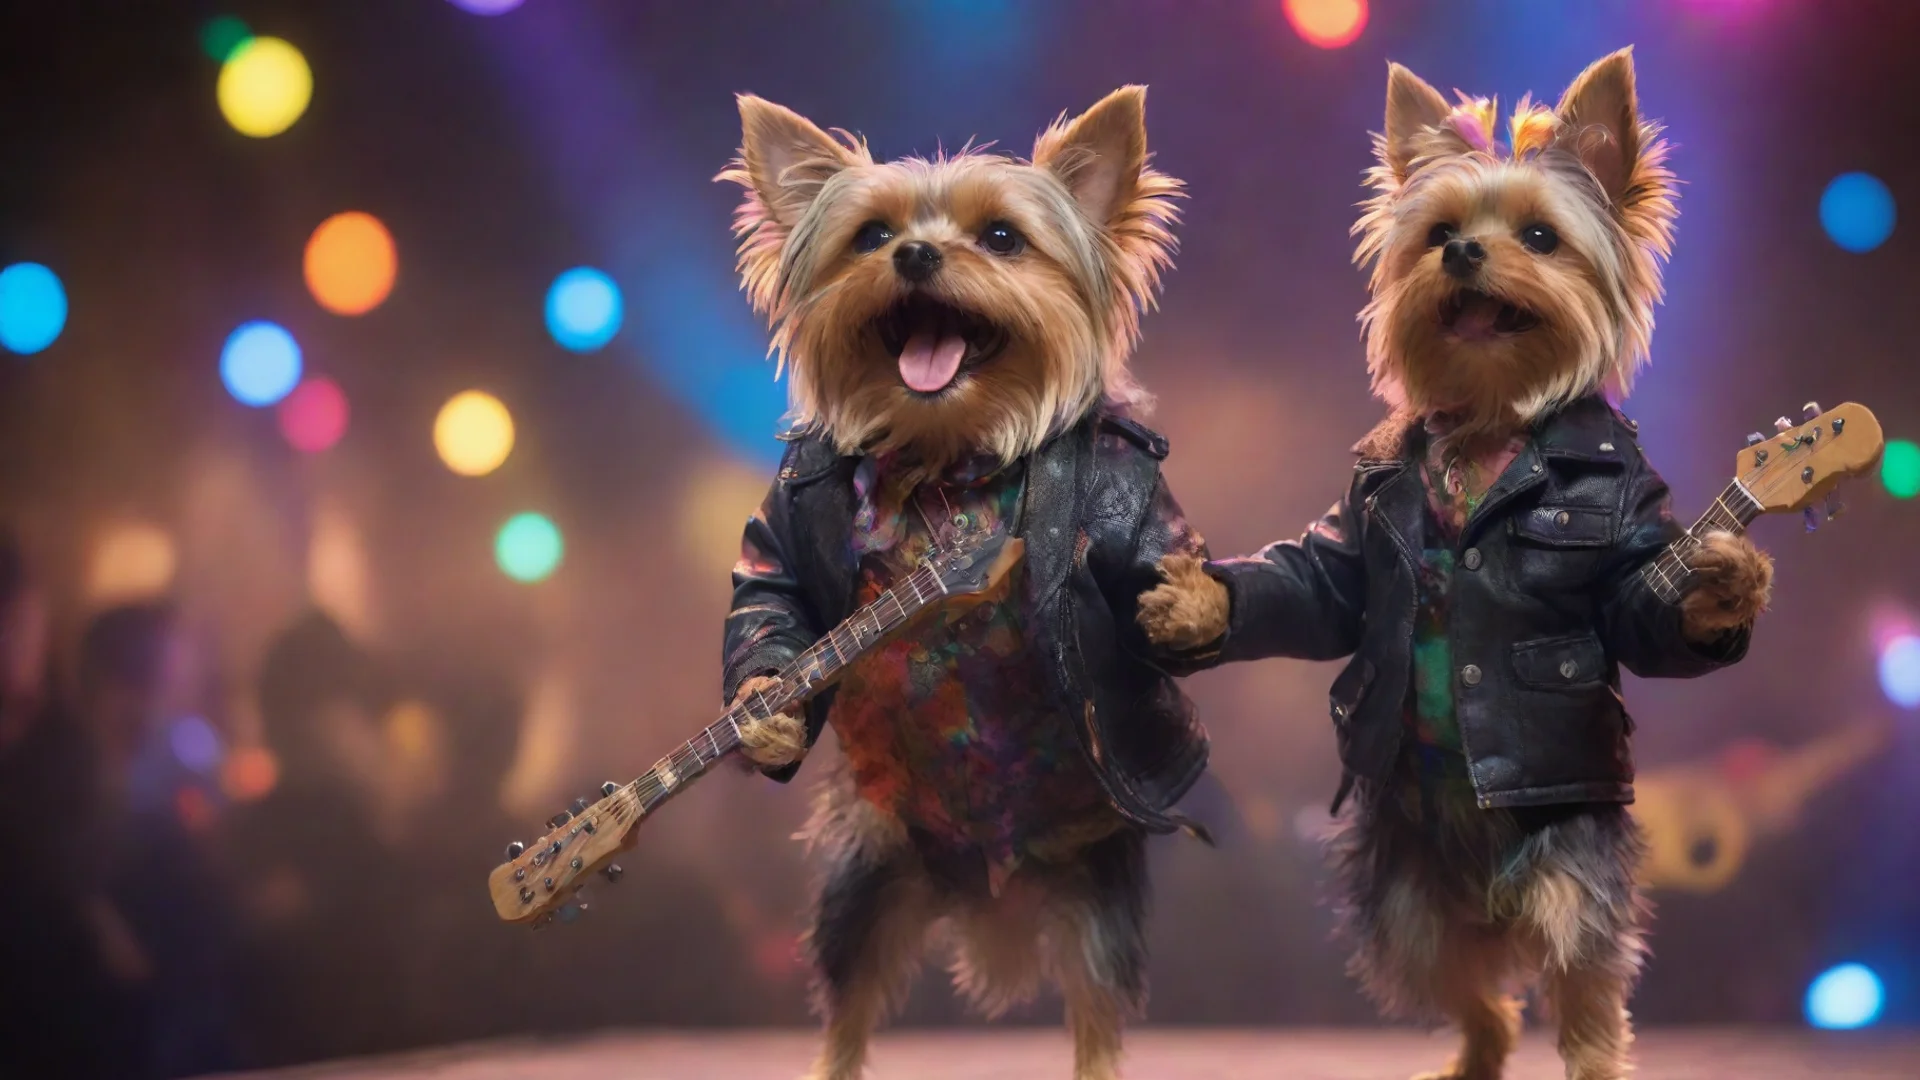 amazing standing yorkshire terrier playing the electric guitar wearing a leater jacket and another one singing holding a micro under colorful lights with public concert awesome portrait 2 wide